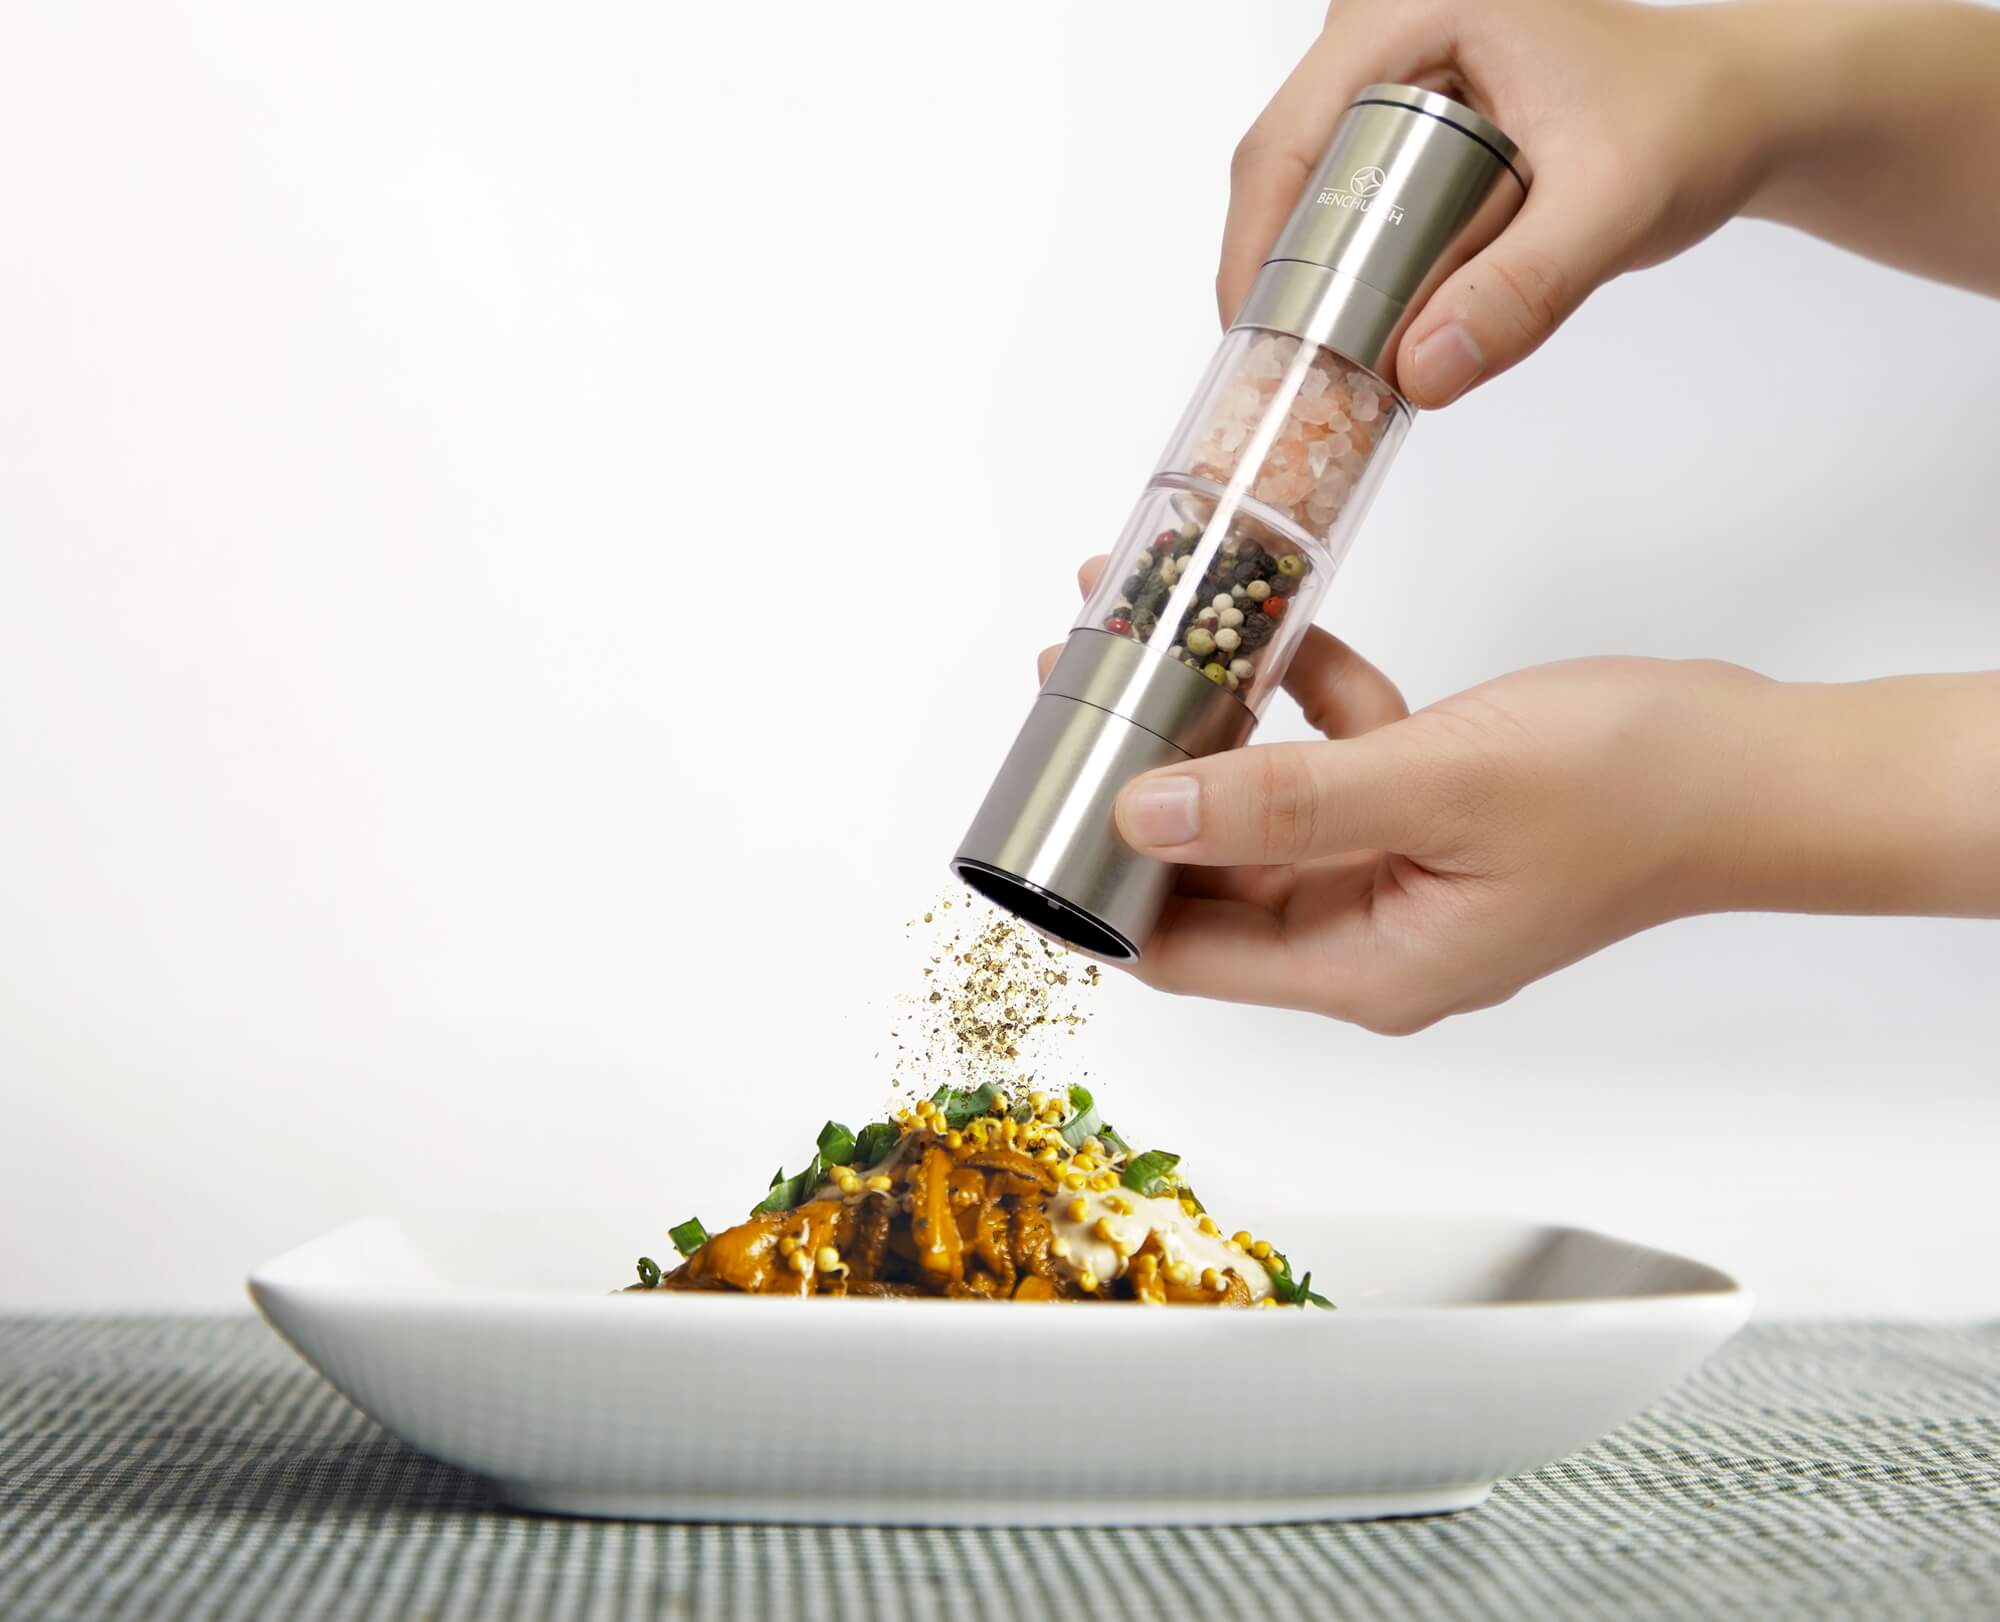 Using Benchusch Compact 2 in 1 Salt and Pepper Grinder to seasoning food